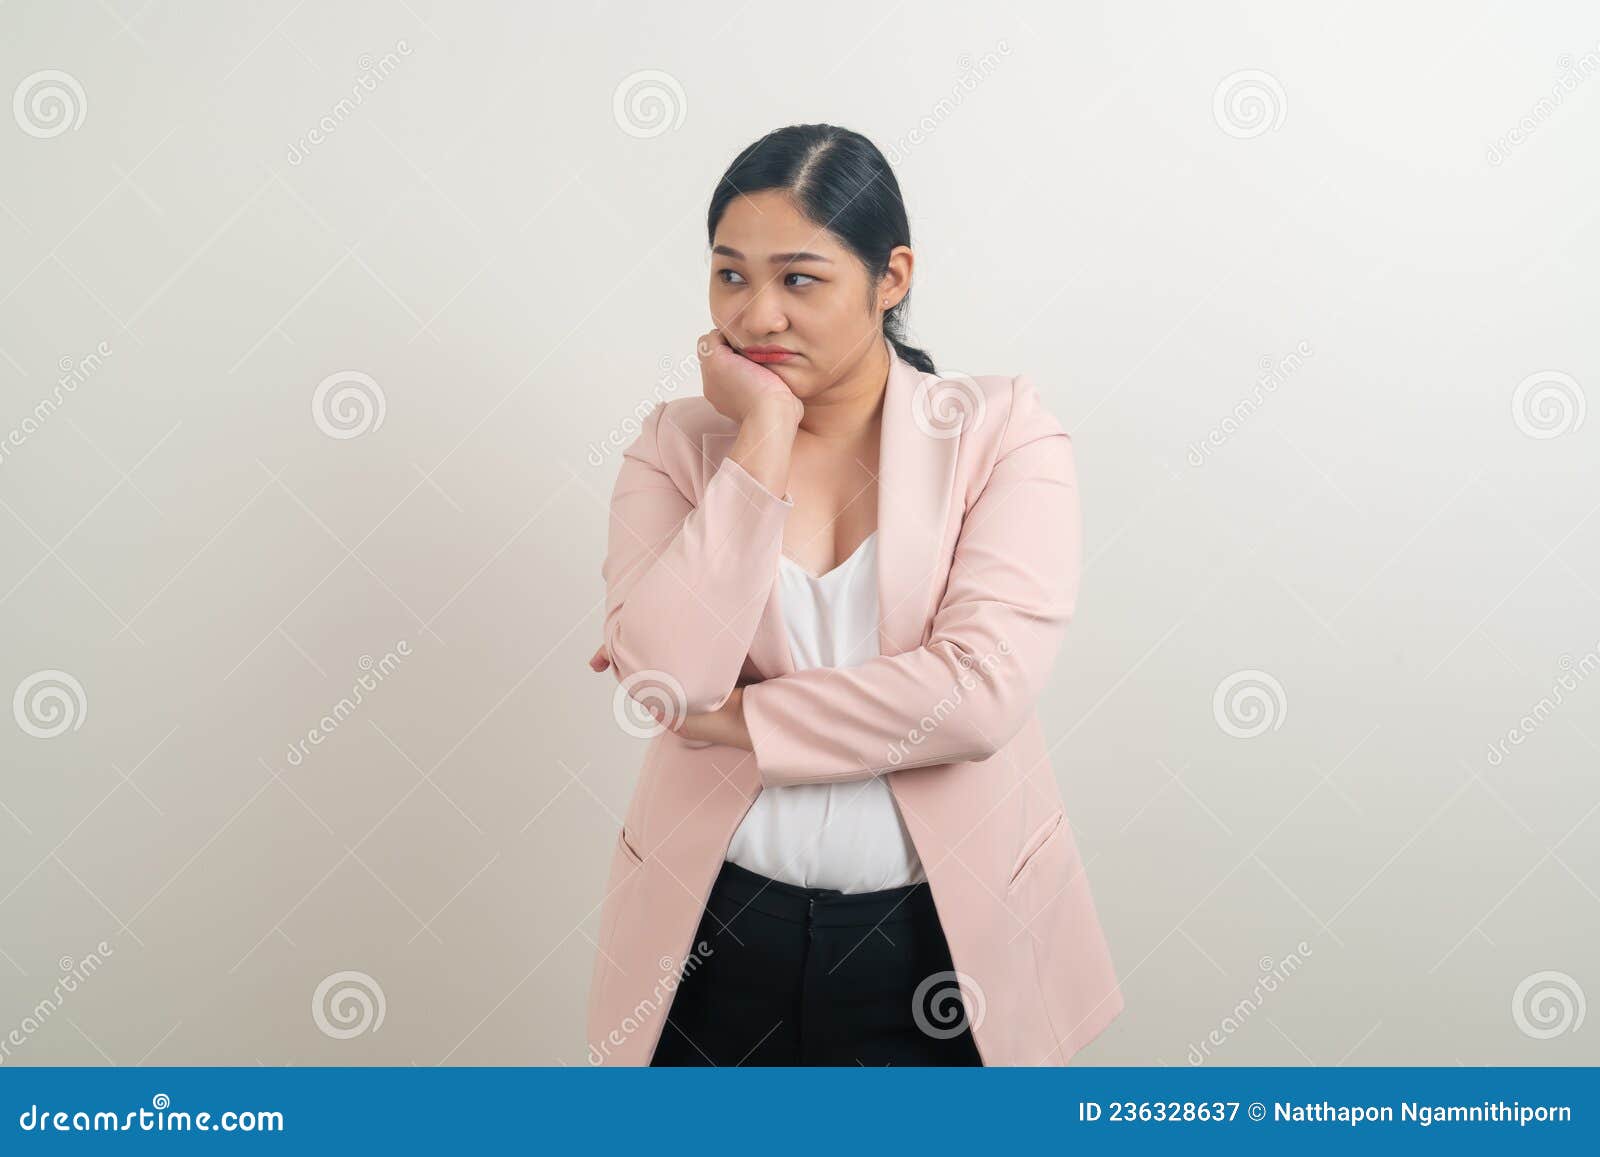 young asian woman with sulk face